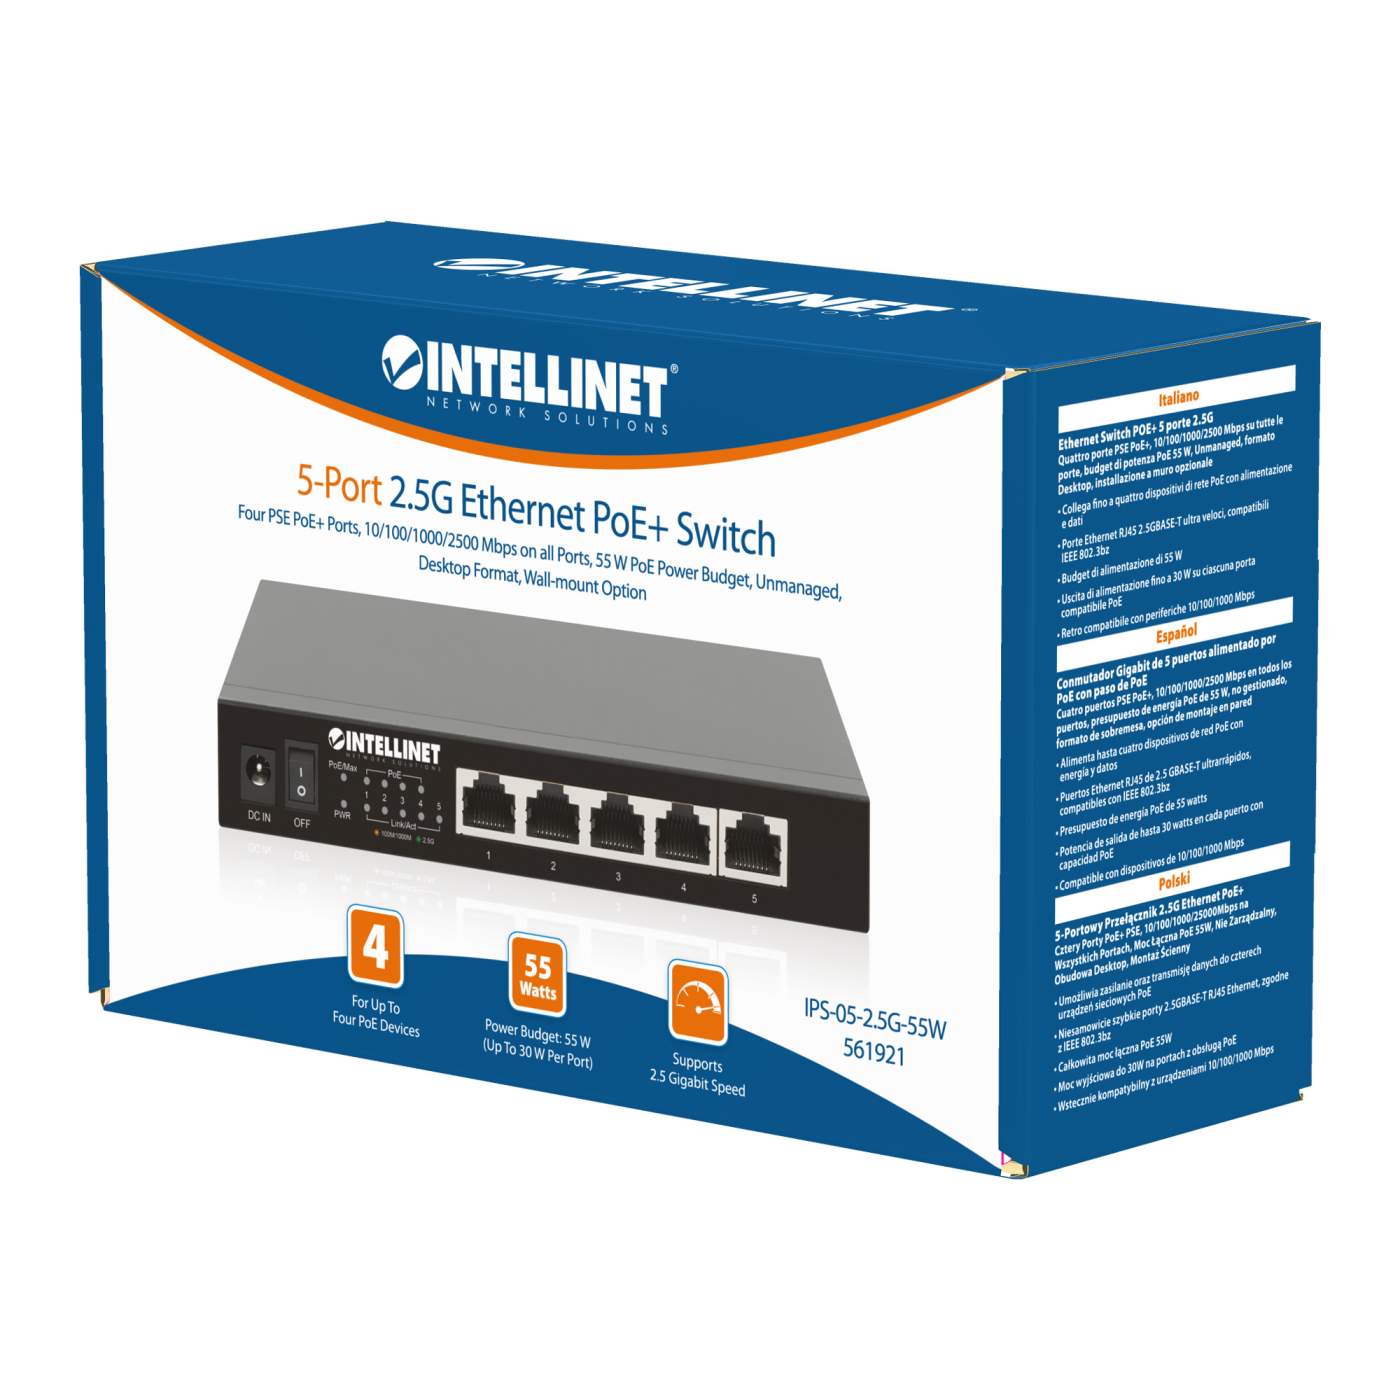 5-Port 2,5G Ethernet PoE+ Switch Packaging Image 2